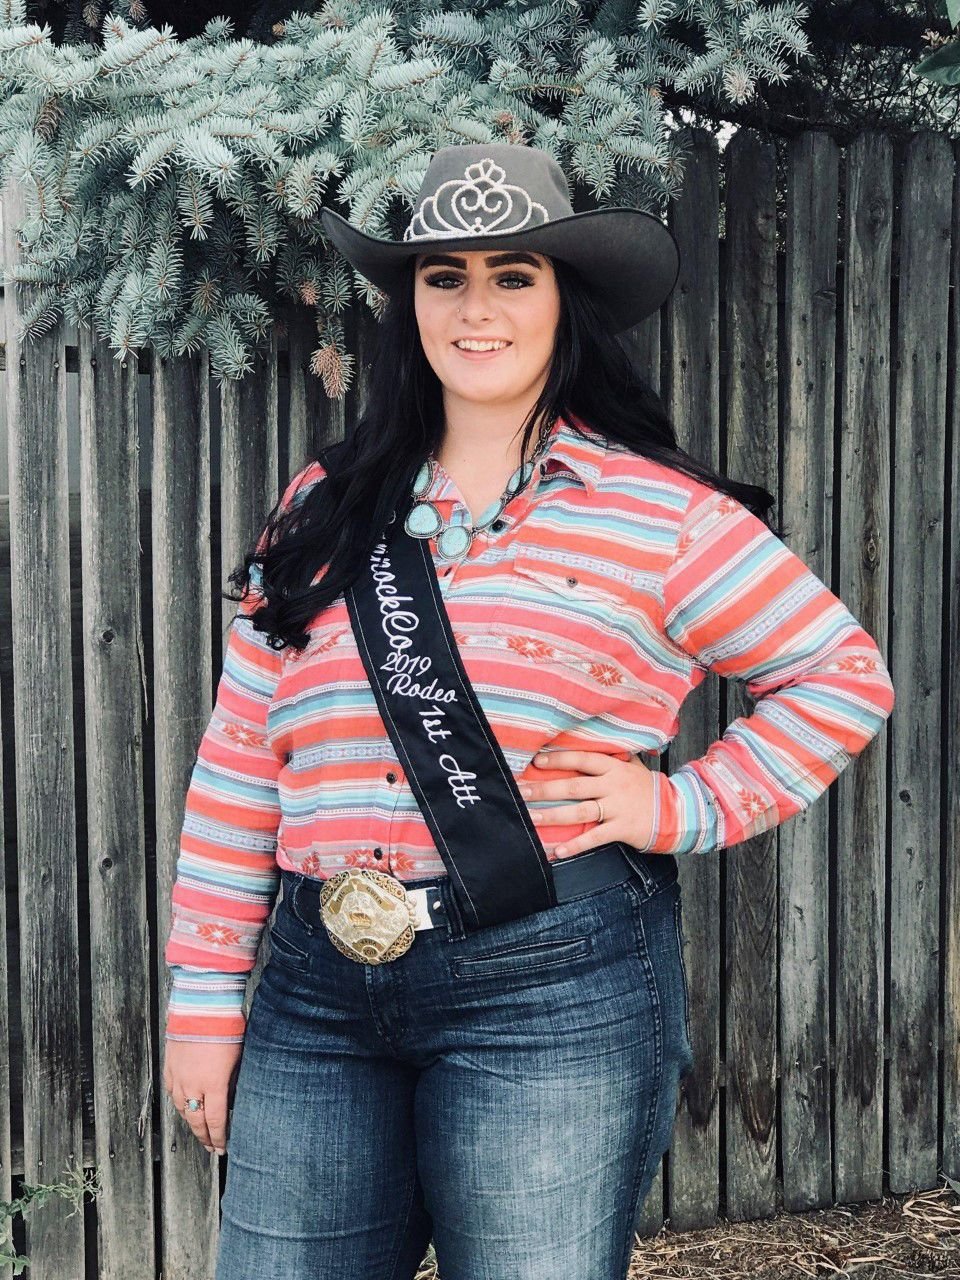 Intermountain Pro Rodeo championship finals queen contest set for